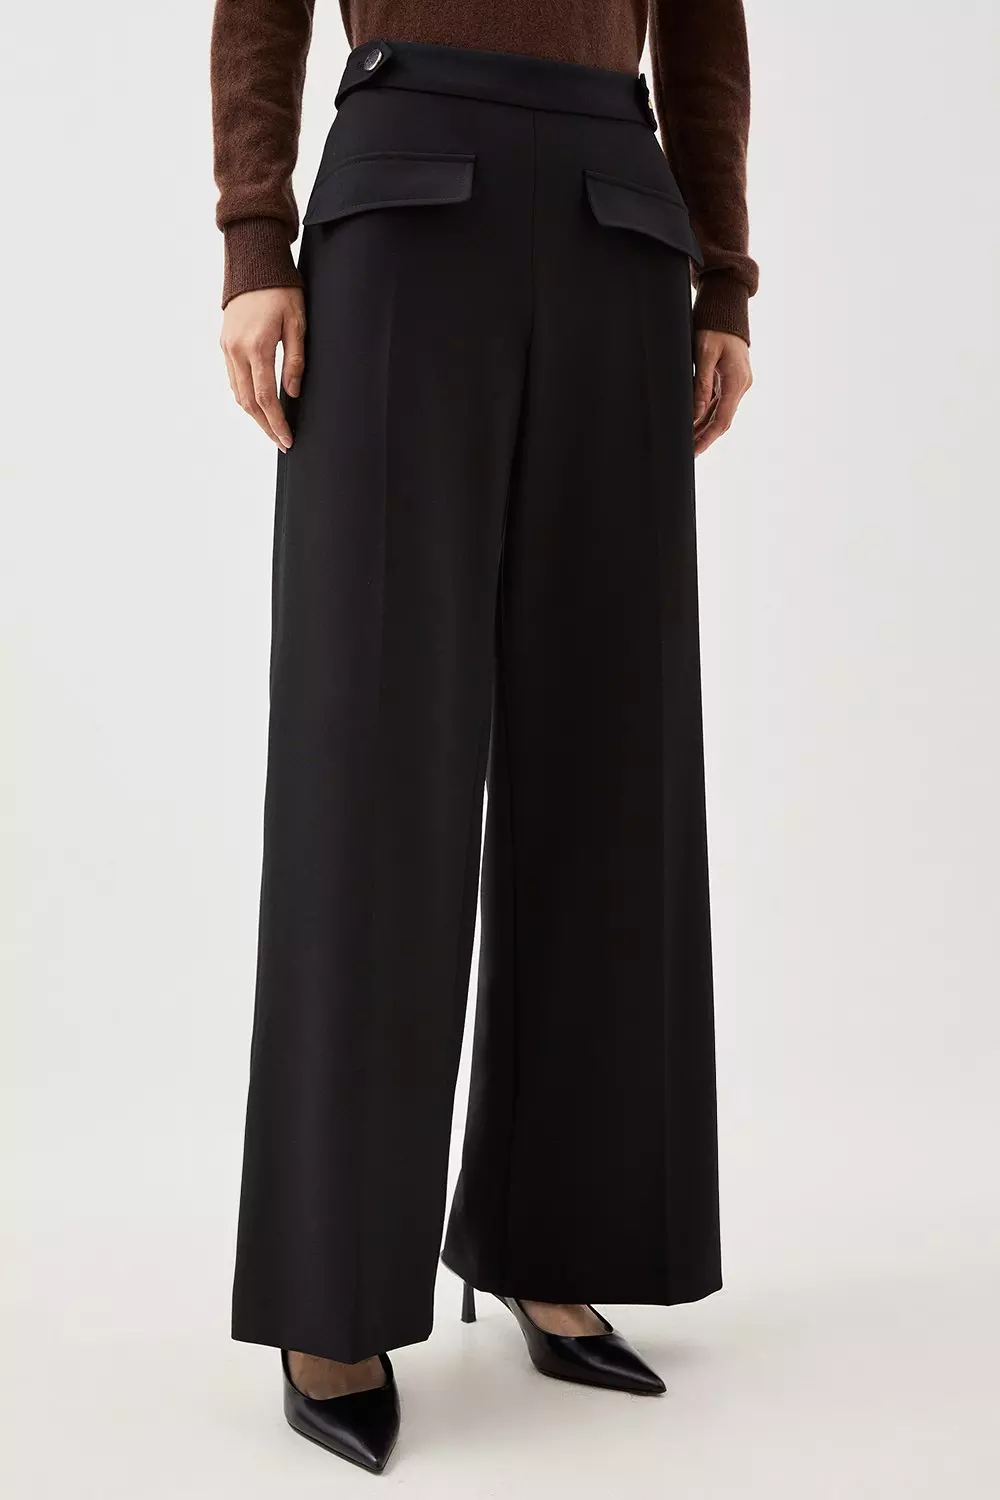 Tailored Compact Stretch High Waist Wide Leg Trousers